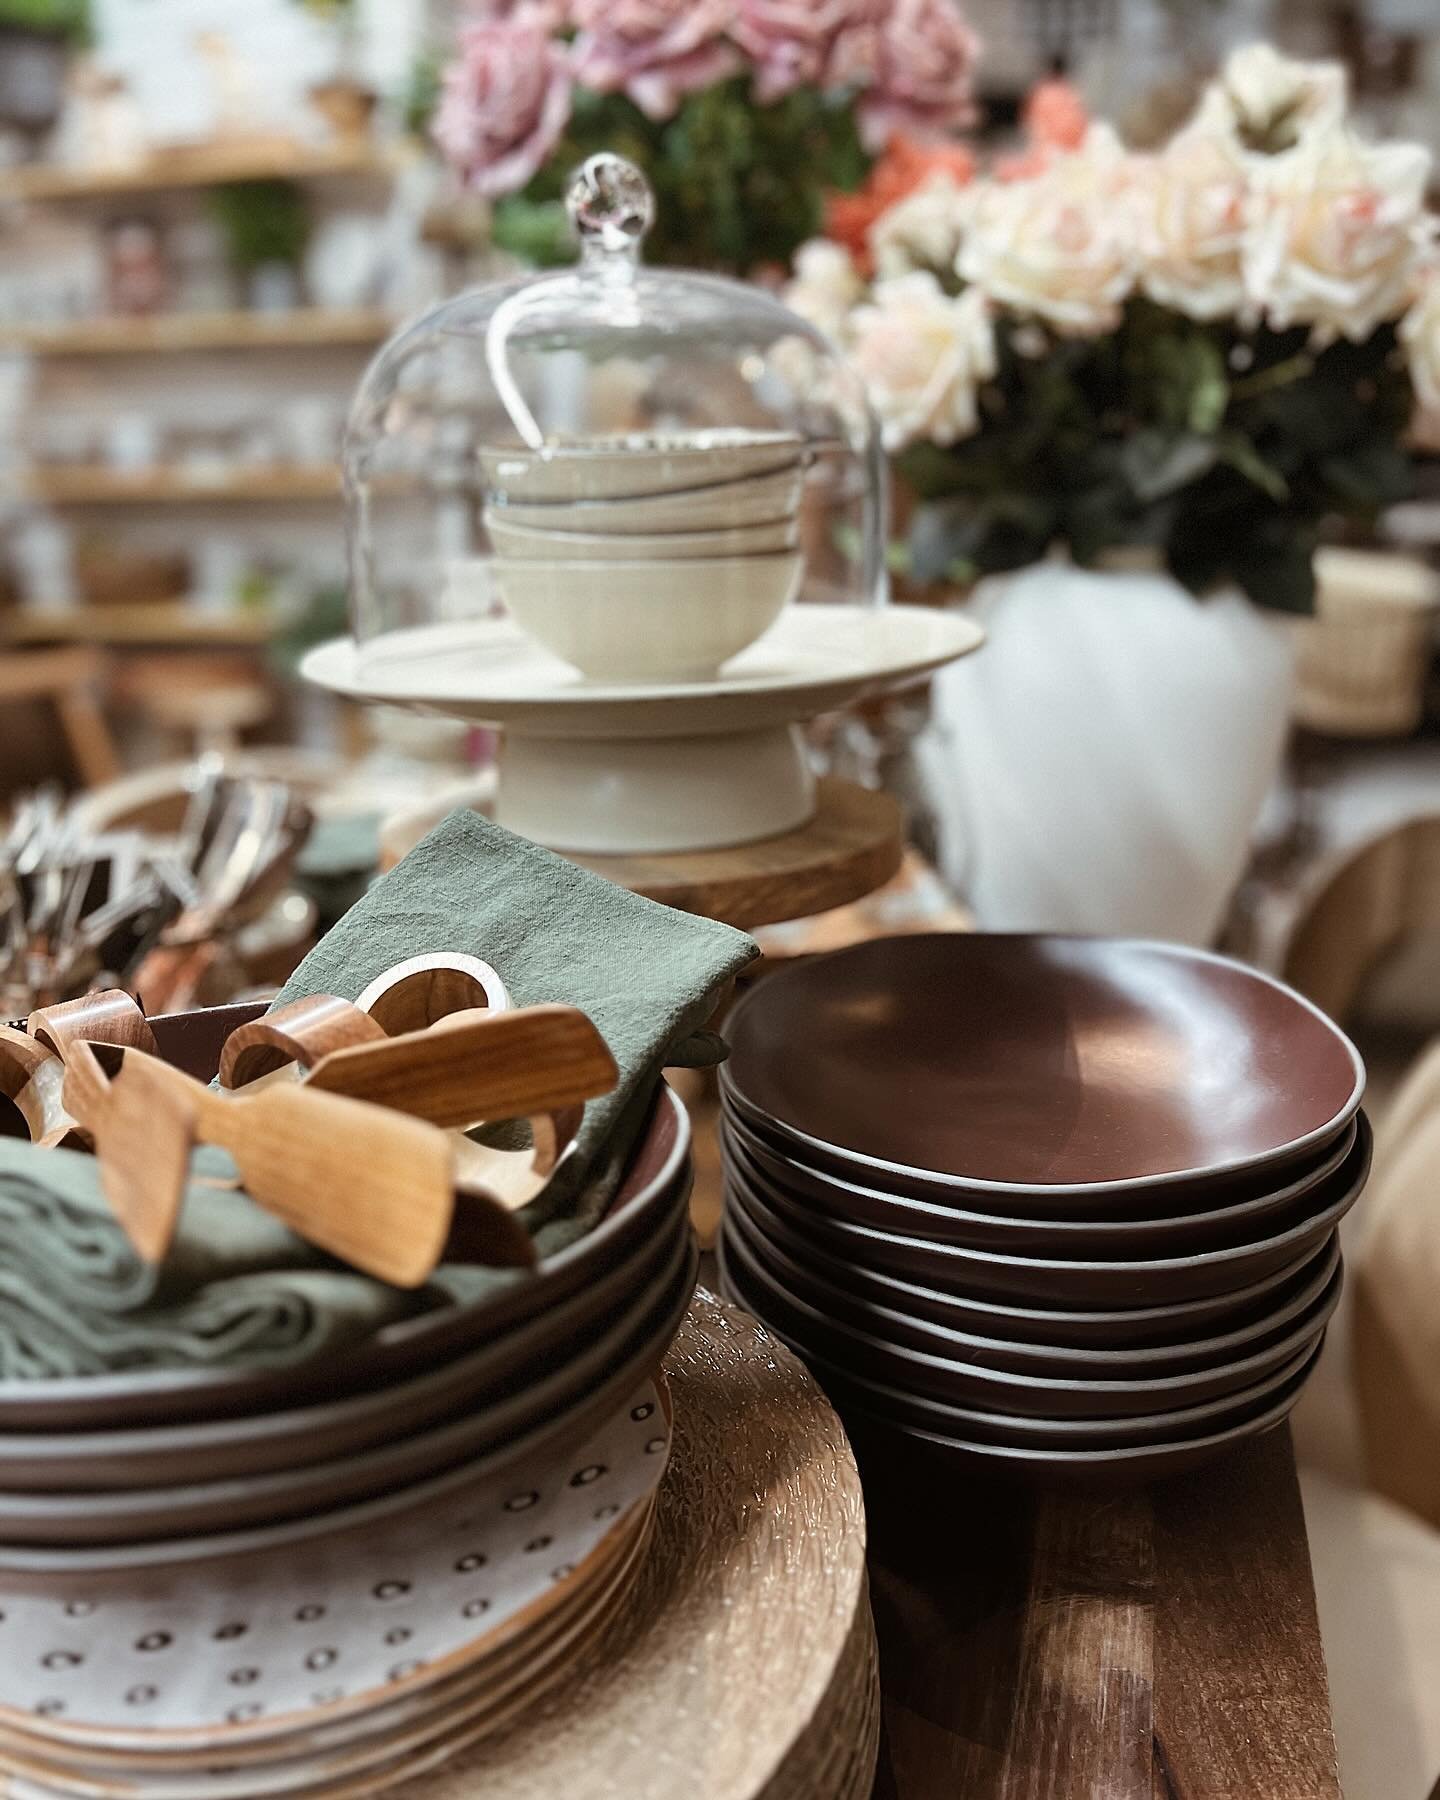 For the love of kitchen 🧀🍞🍷

Serve it up in style with new serveware, tiny details that matter, and lifelike florals that pair well with impromptu gatherings and conversations around the table. 

📍3239 SR 39 Millersburg, OH

#kitchenlove #kitchen